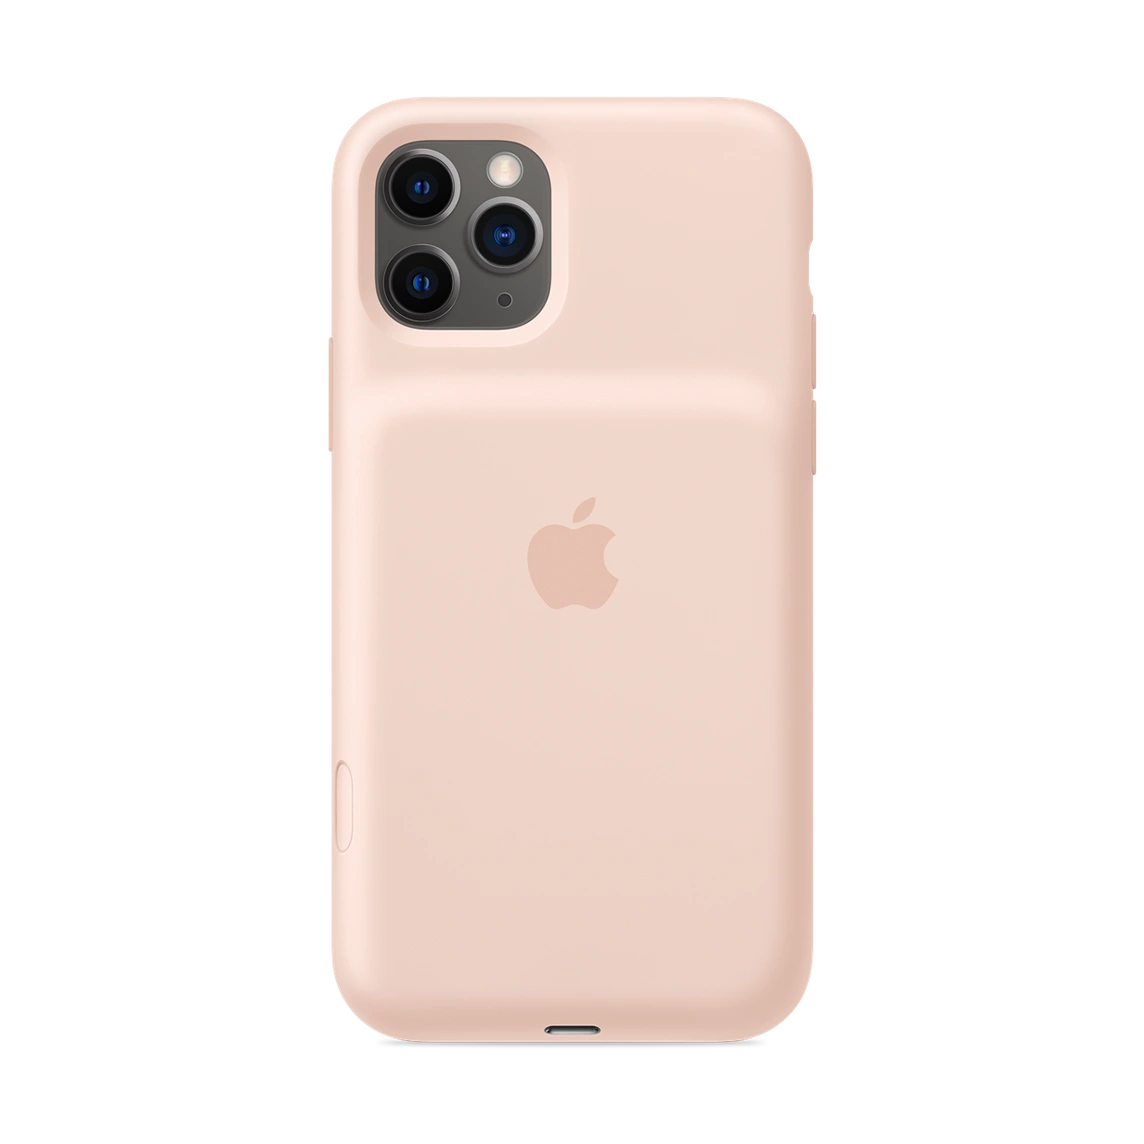 Apple iPhone 11 Pro Max Smart Battery Case